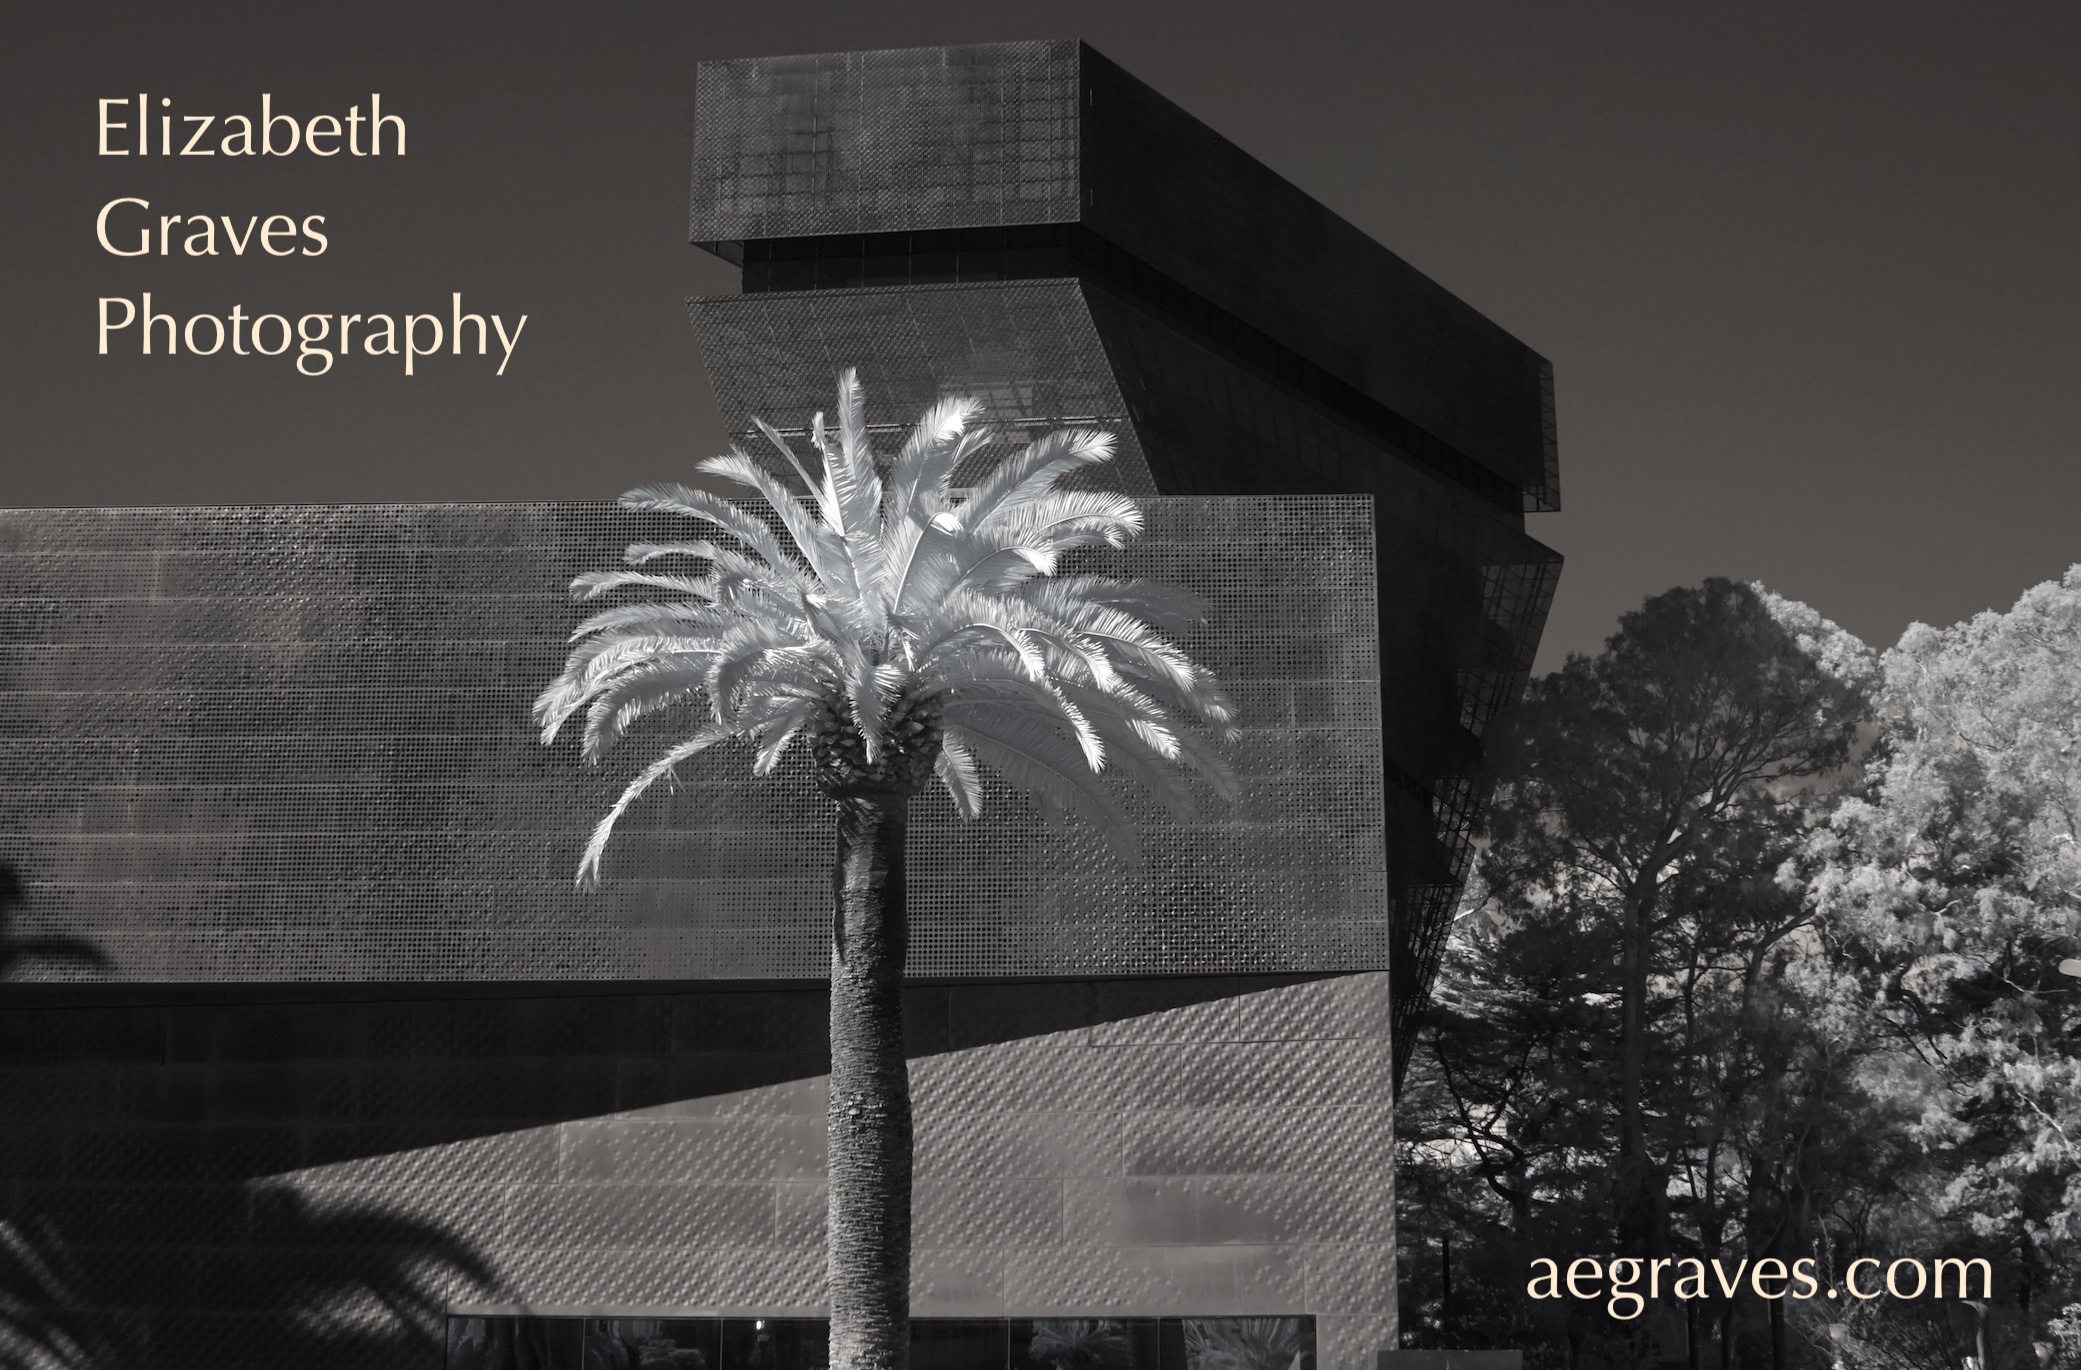 Infrared image the deYoung Museum in Golden Gate Park, San Francisco, California, by A.E. Graves